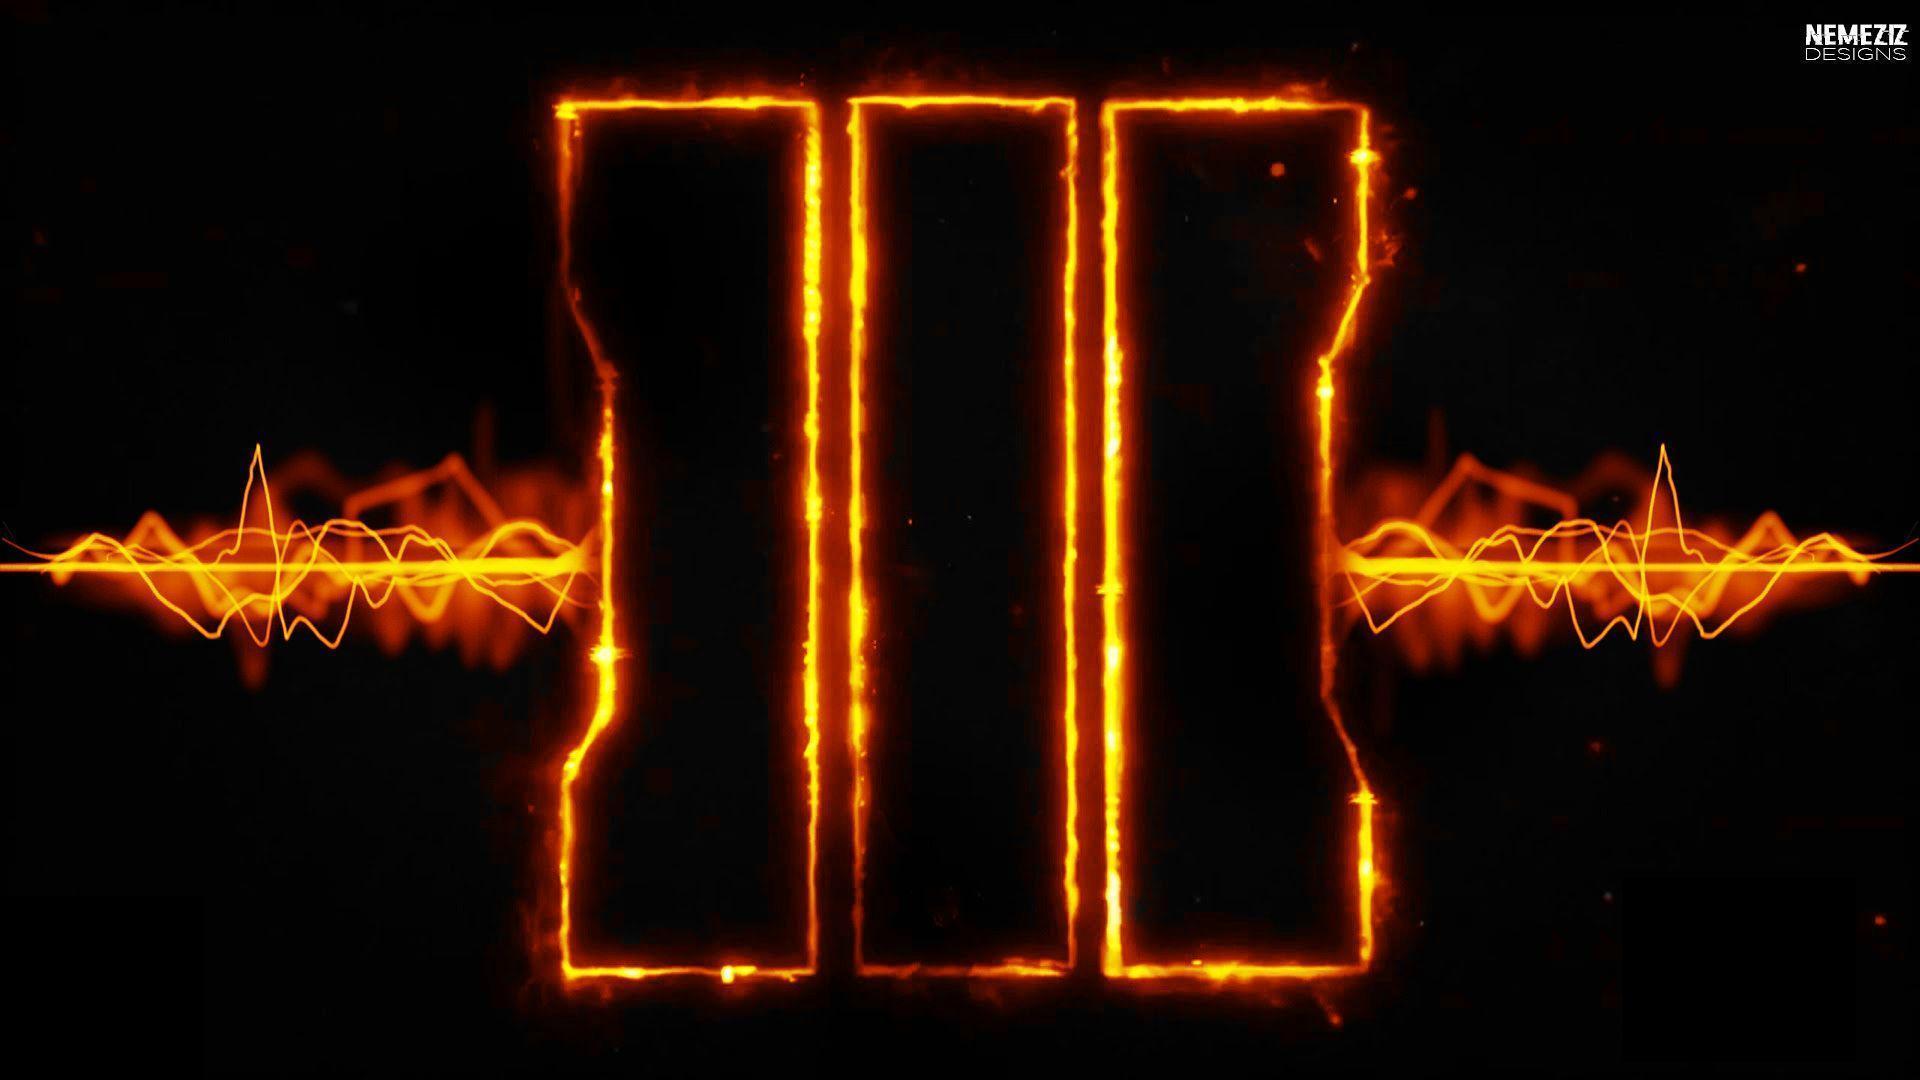 Call Of Duty Black Ops 3 Hd Wallpapers Wallpaper Cave